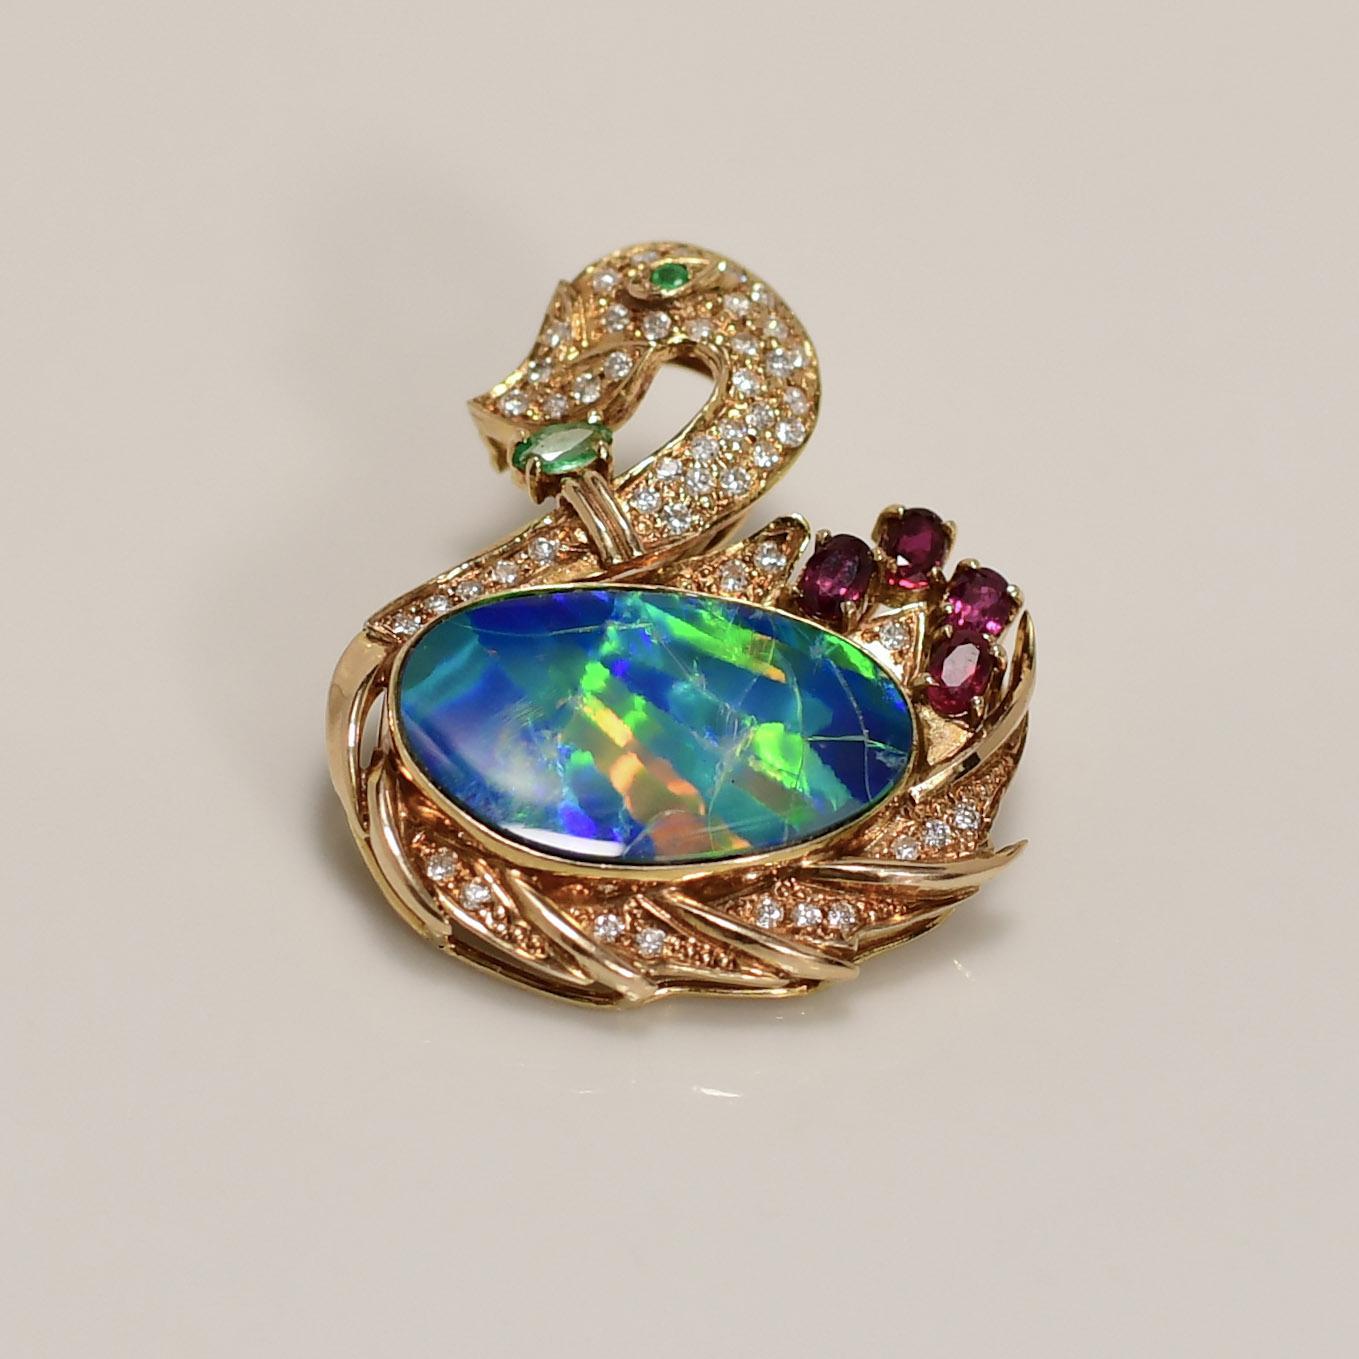 Dazzle and enchant with this exquisite 18K Black Opal and Diamond Swan Brooch, a true masterpiece of jewelry artistry. Crafted in luxurious 18K gold, the brooch boasts a graceful swan design adorned with mesmerizing black opals that shimmer with a